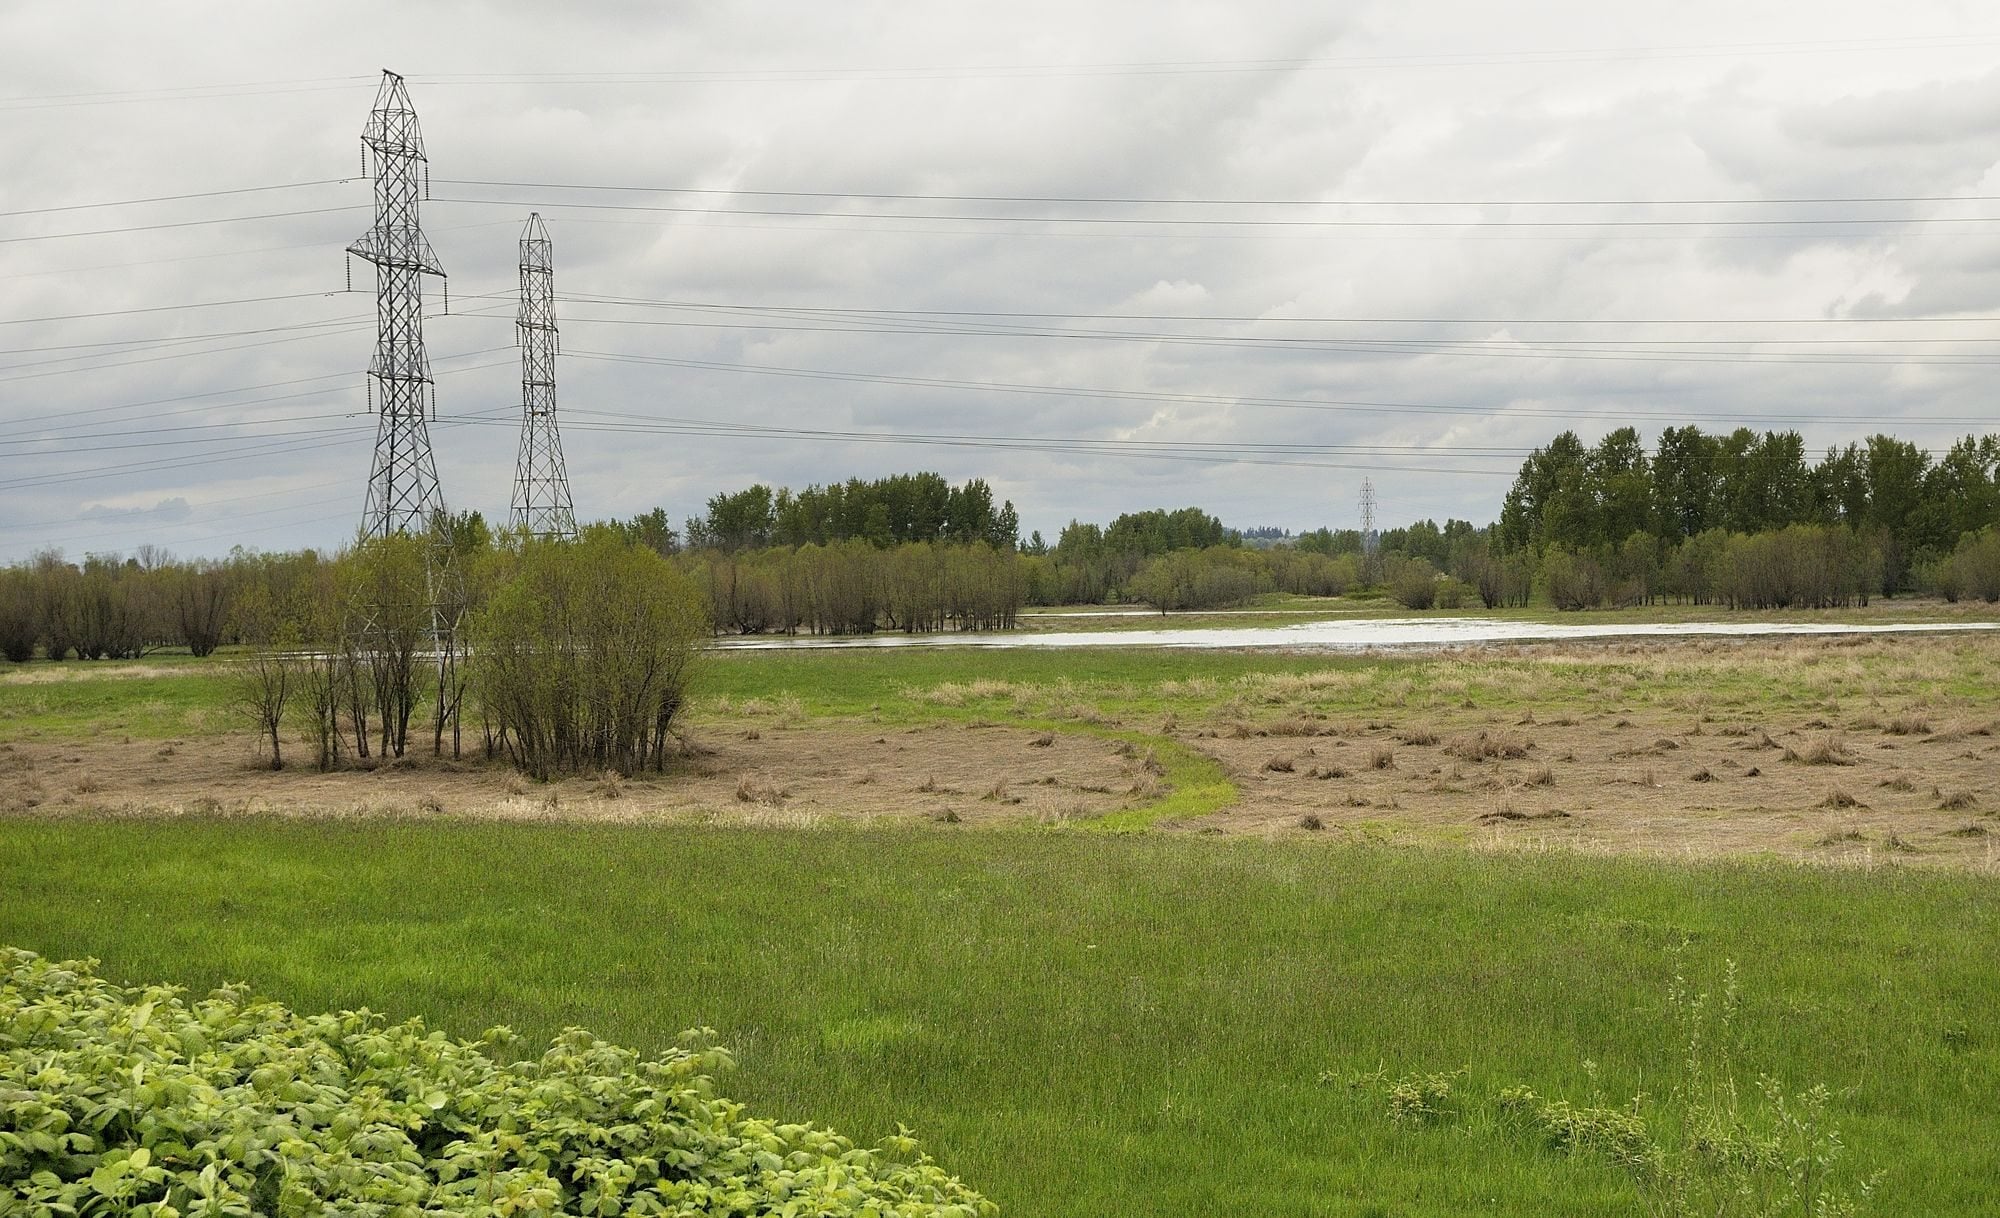 A 154-acre site owned by the Port of Vancouver, part of the former Rufener Dairy, will become Clark County's first wetland mitigation bank, where government agencies and private companies will be able to purchase &quot;credits' to offset destruction of wetlands near the Columbia River.